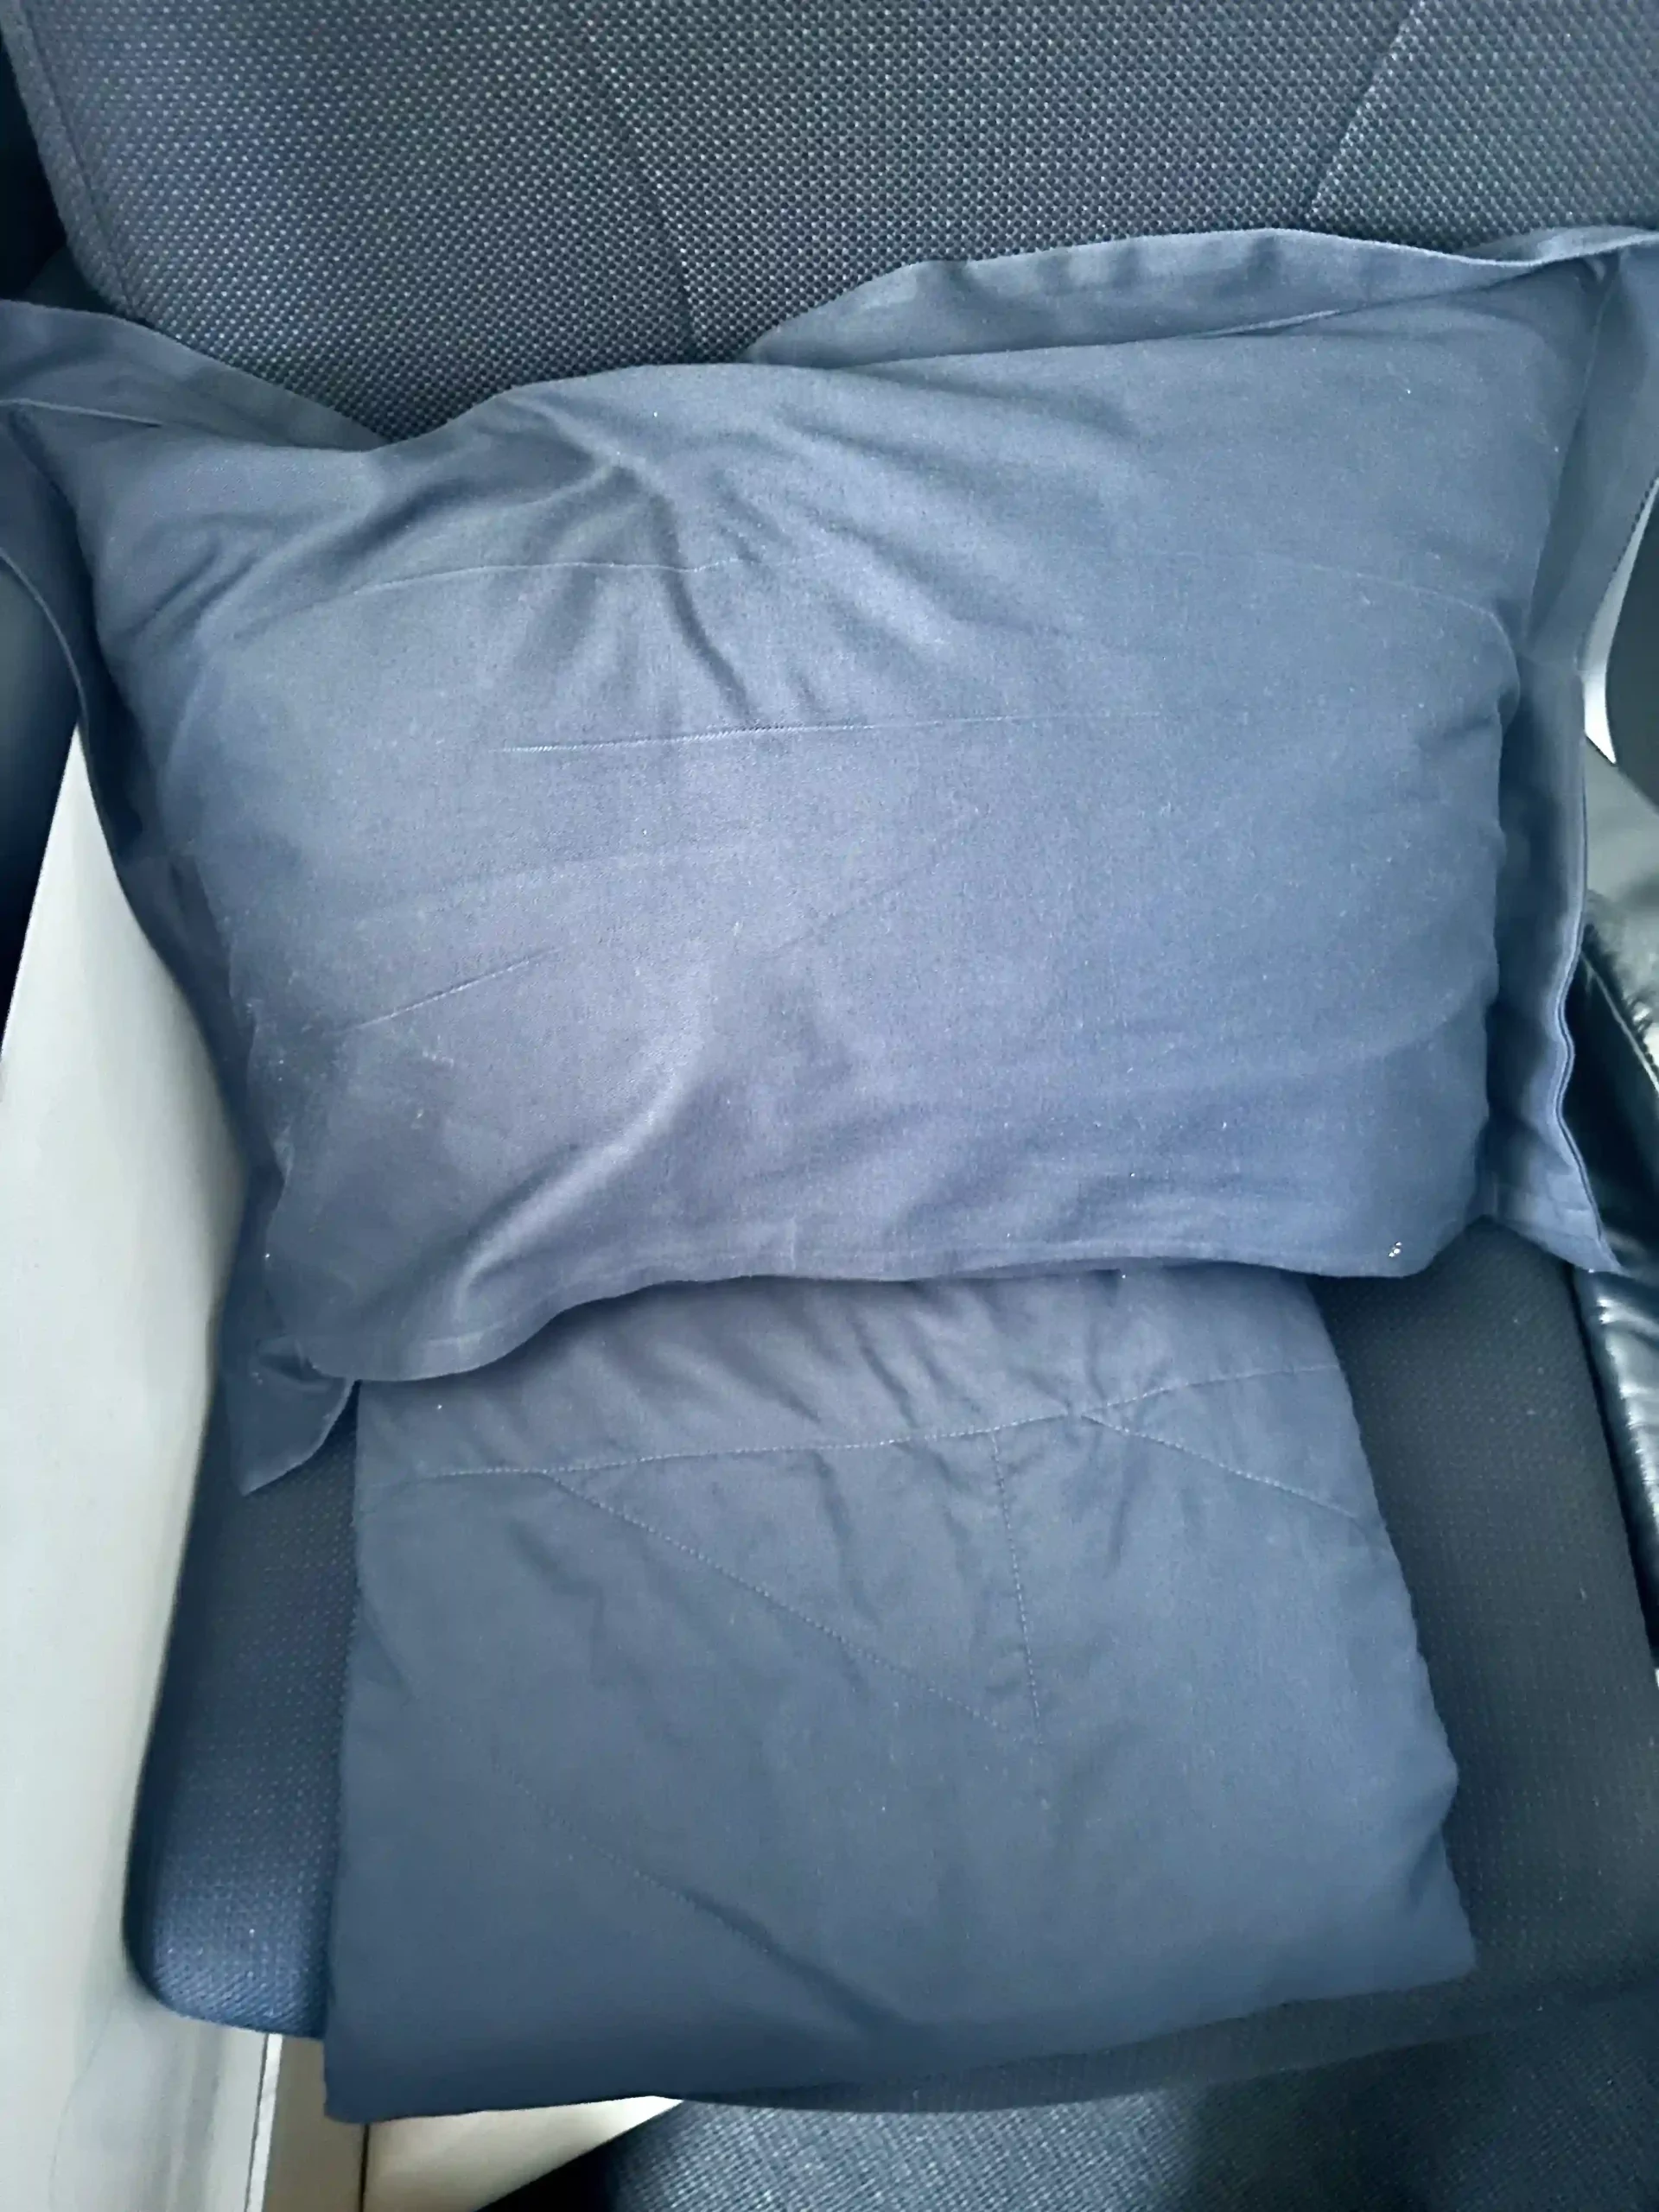 a pillow on a couch